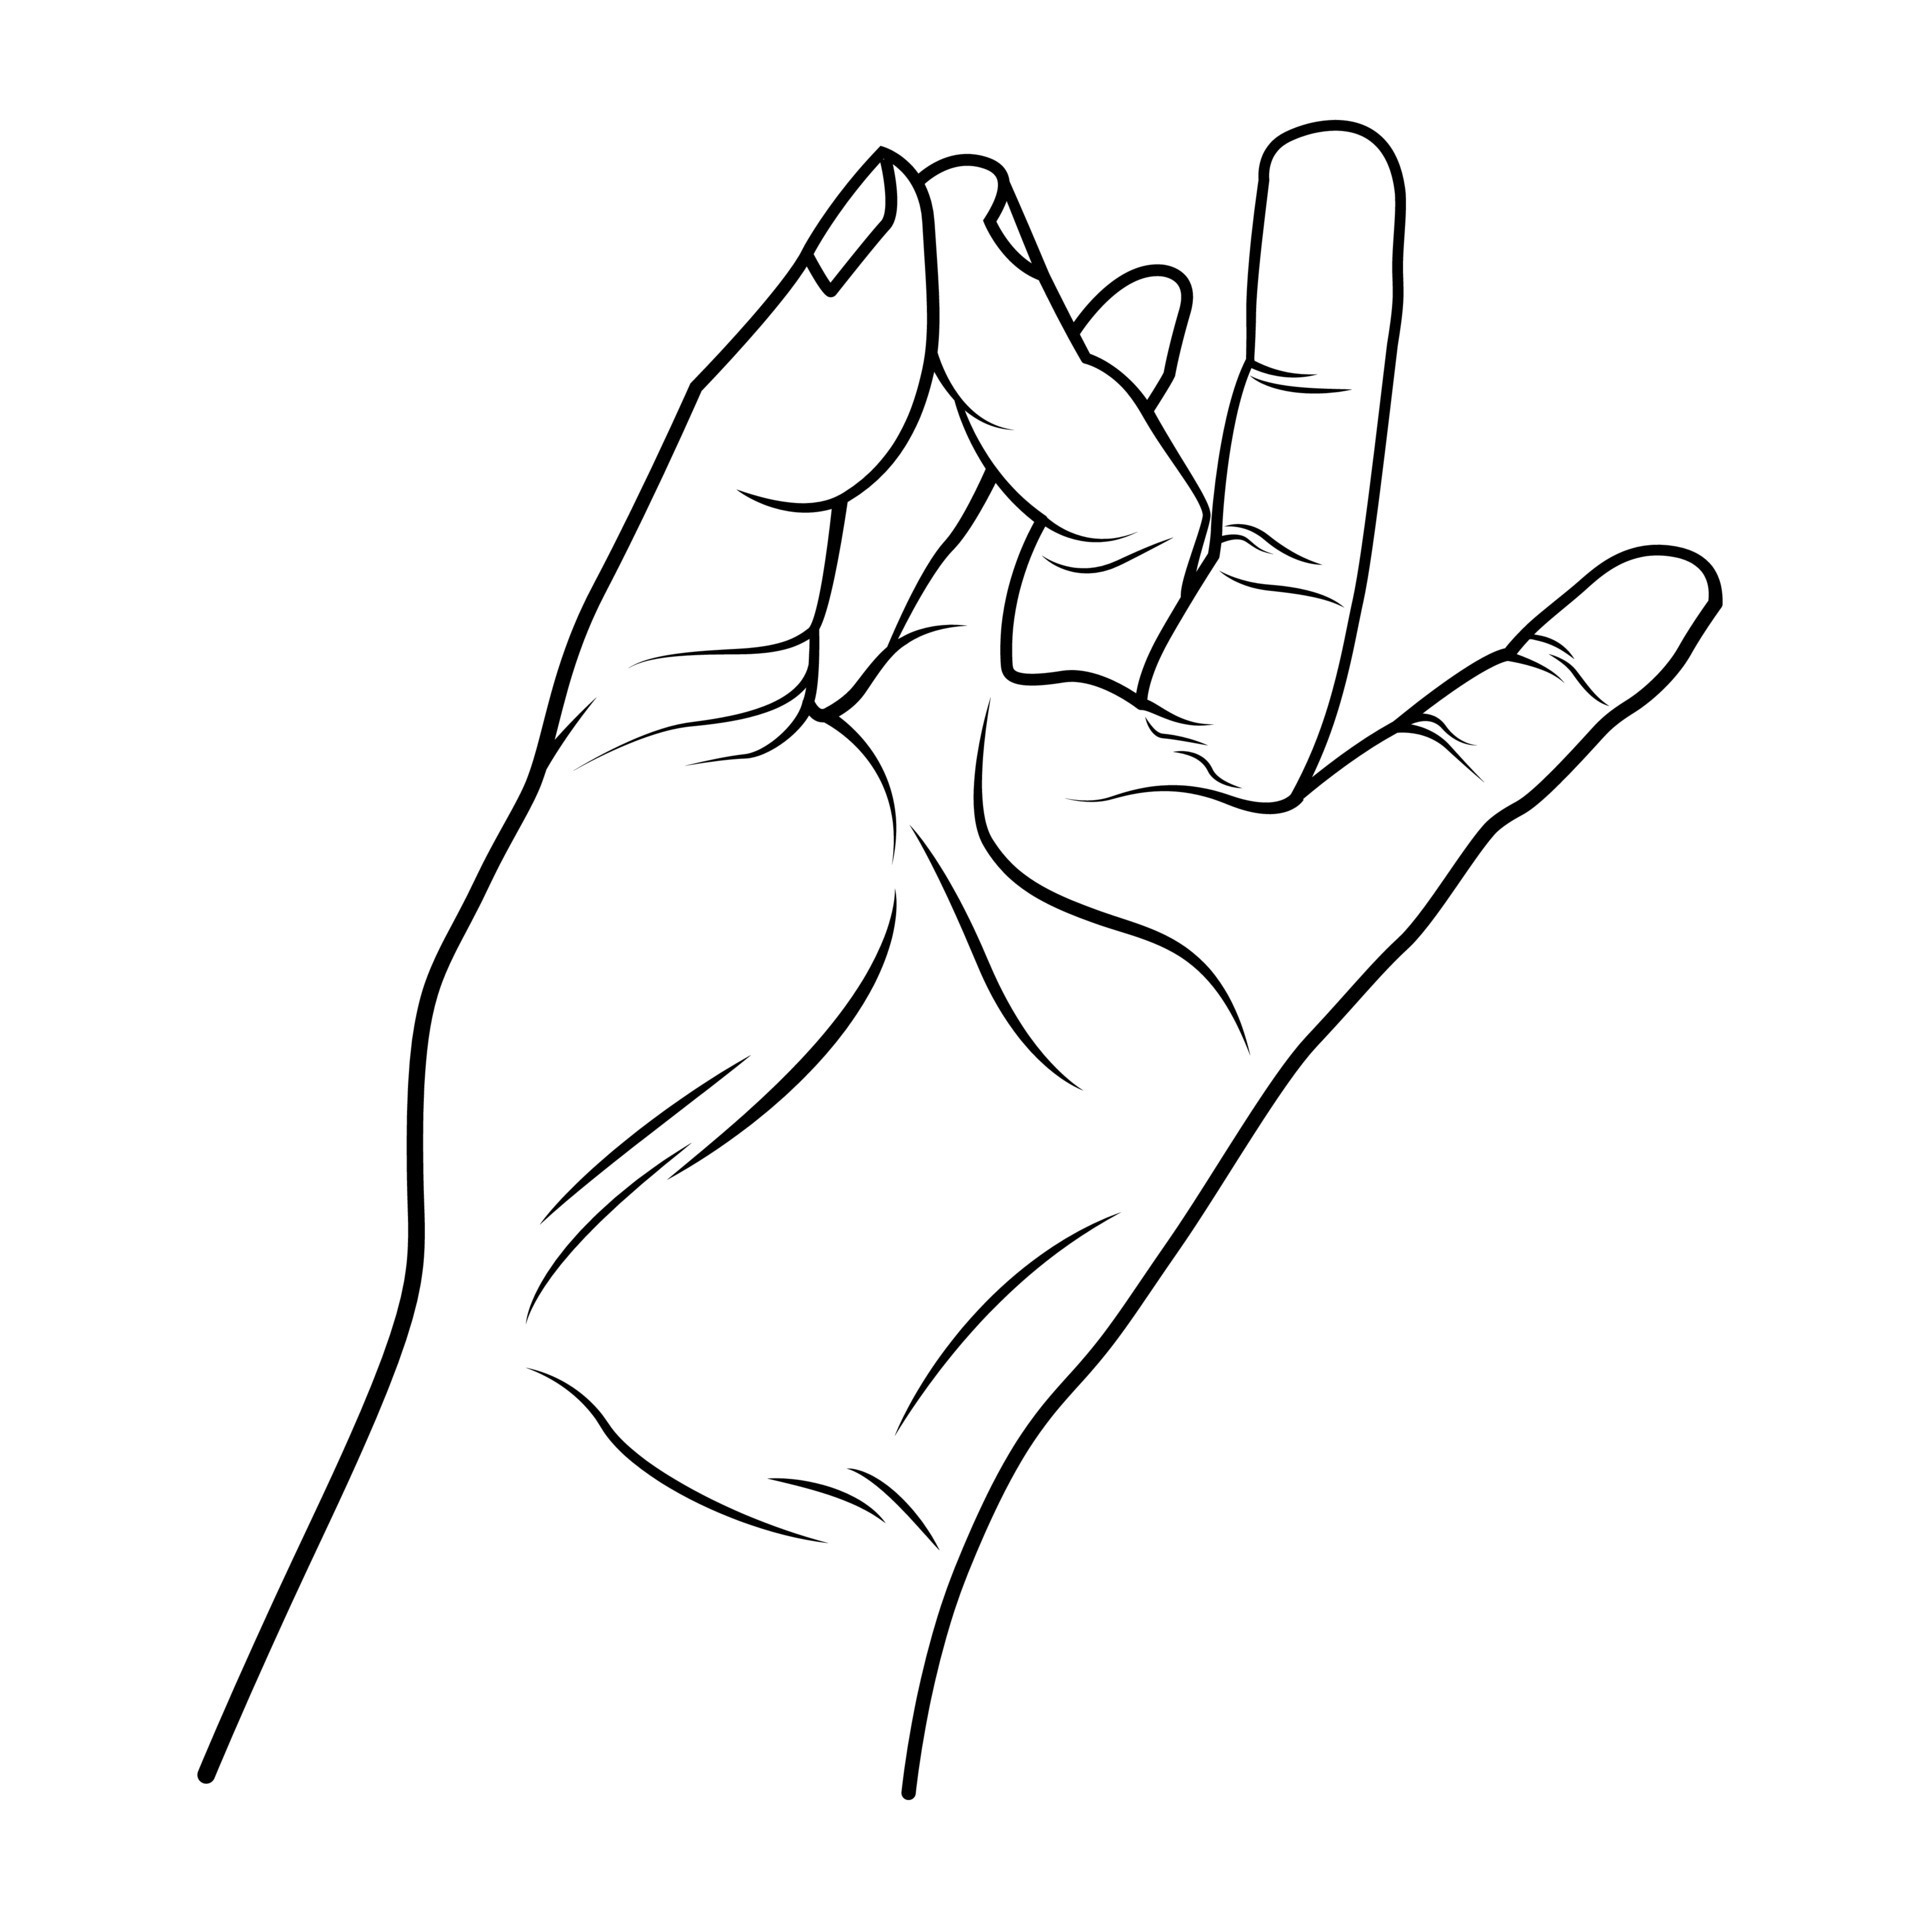 Hand illustration in line art style with meditation symbol 8294564 ...